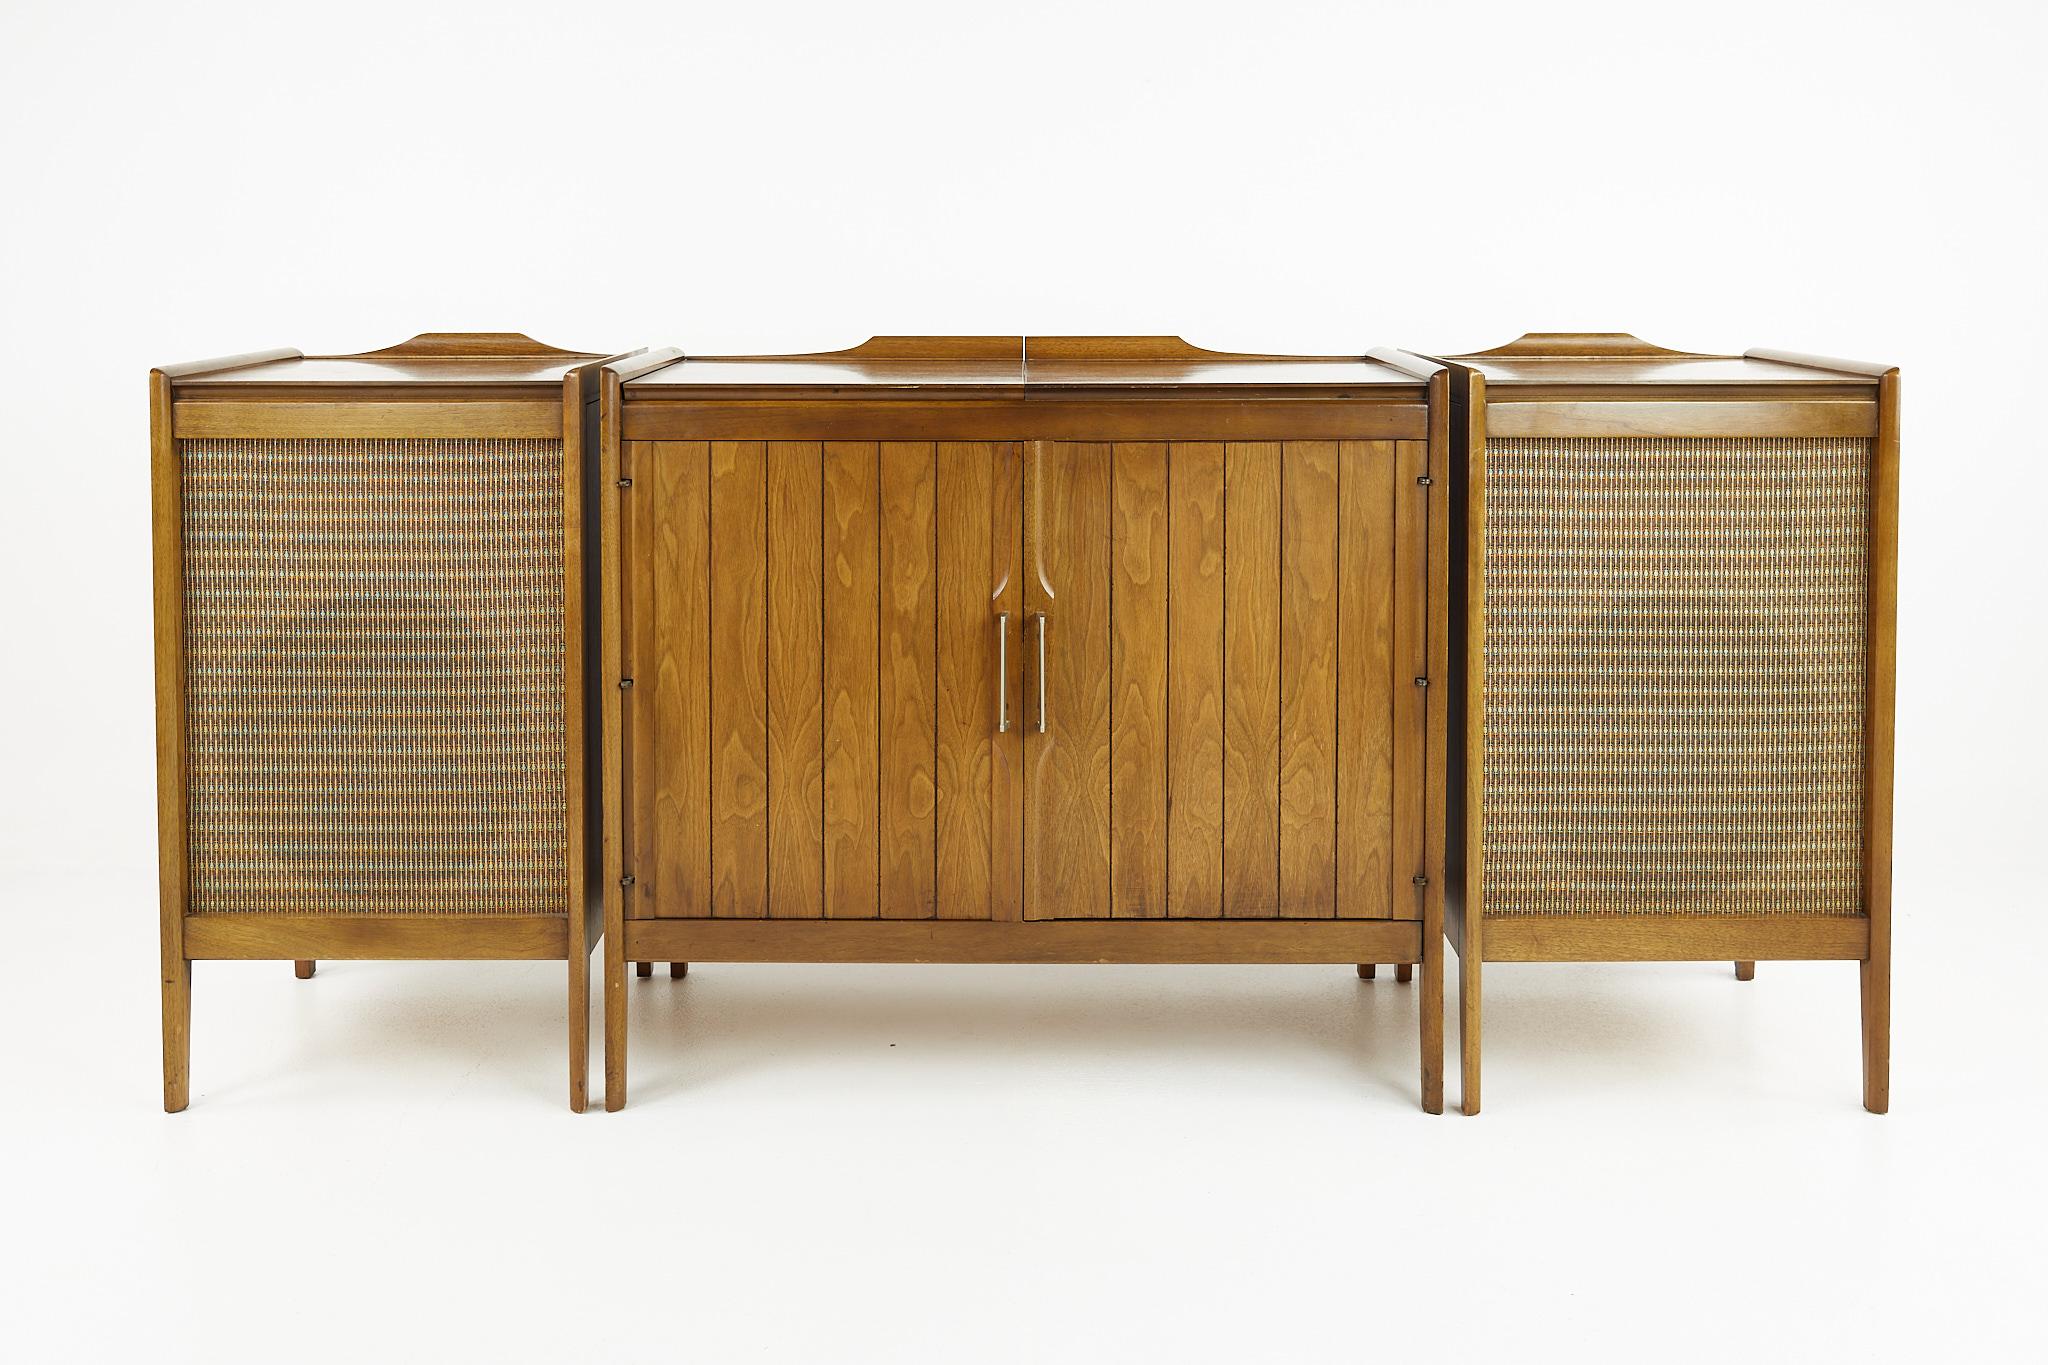 Mid century three piece stereo console and speakers

This console measures: 36 wide x 19.5 deep x 33 inches high, and each speaker is 18.5 wide x 18.75 deep x 33.25 inches high

All pieces of furniture can be had in what we call restored vintage